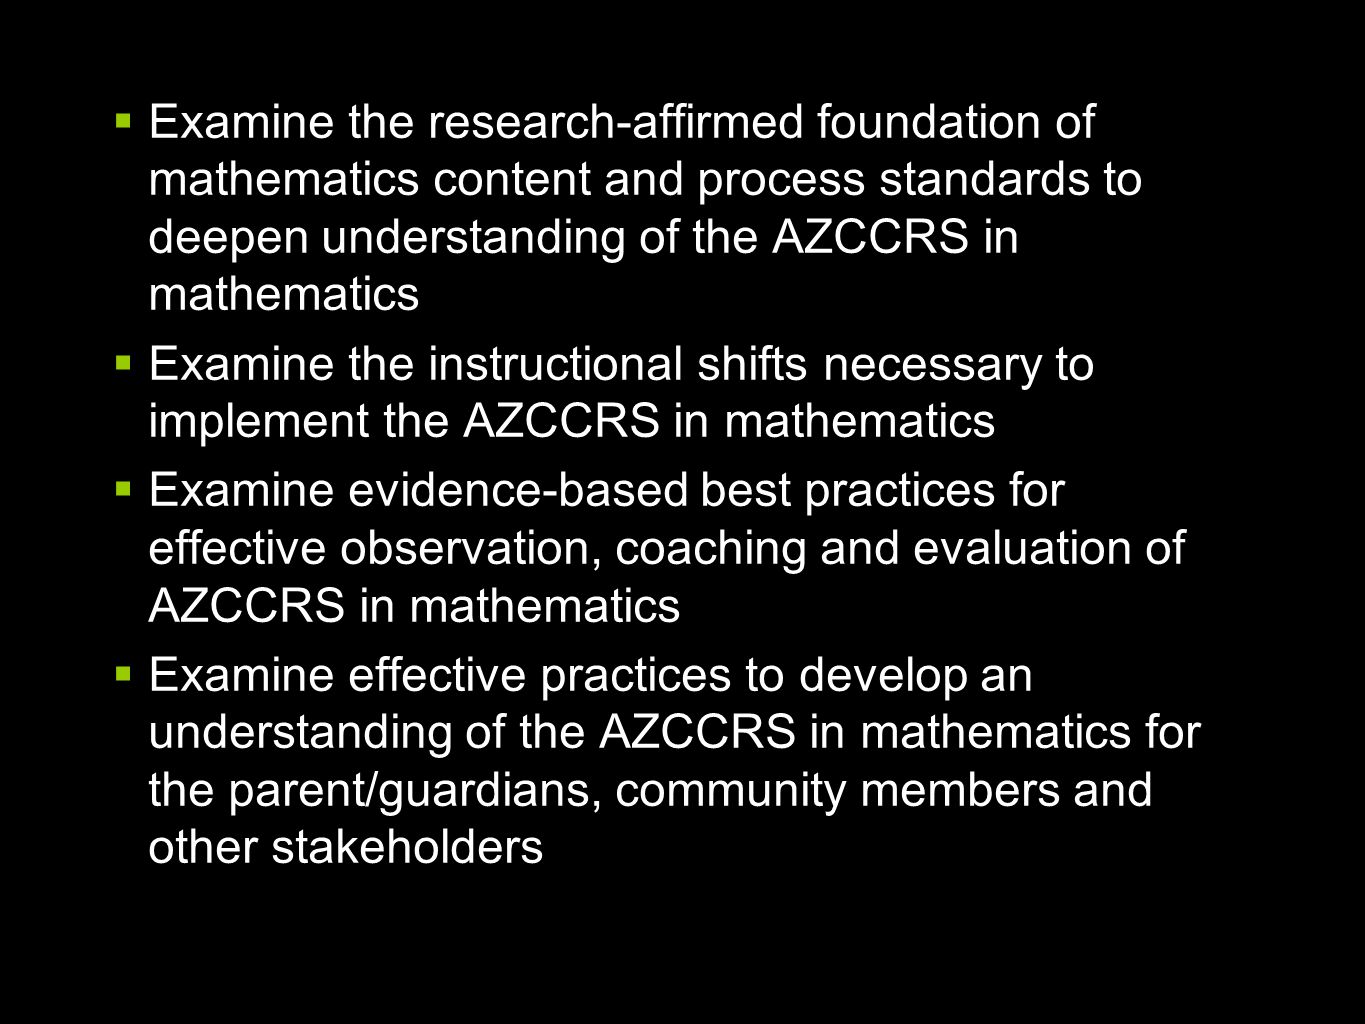  Examine the research-affirmed foundation of mathematics content and process standards to deepen understanding of the AZCCRS in mathematics  Examine the instructional shifts necessary to implement the AZCCRS in mathematics  Examine evidence-based best practices for effective observation, coaching and evaluation of AZCCRS in mathematics  Examine effective practices to develop an understanding of the AZCCRS in mathematics for the parent/guardians, community members and other stakeholders